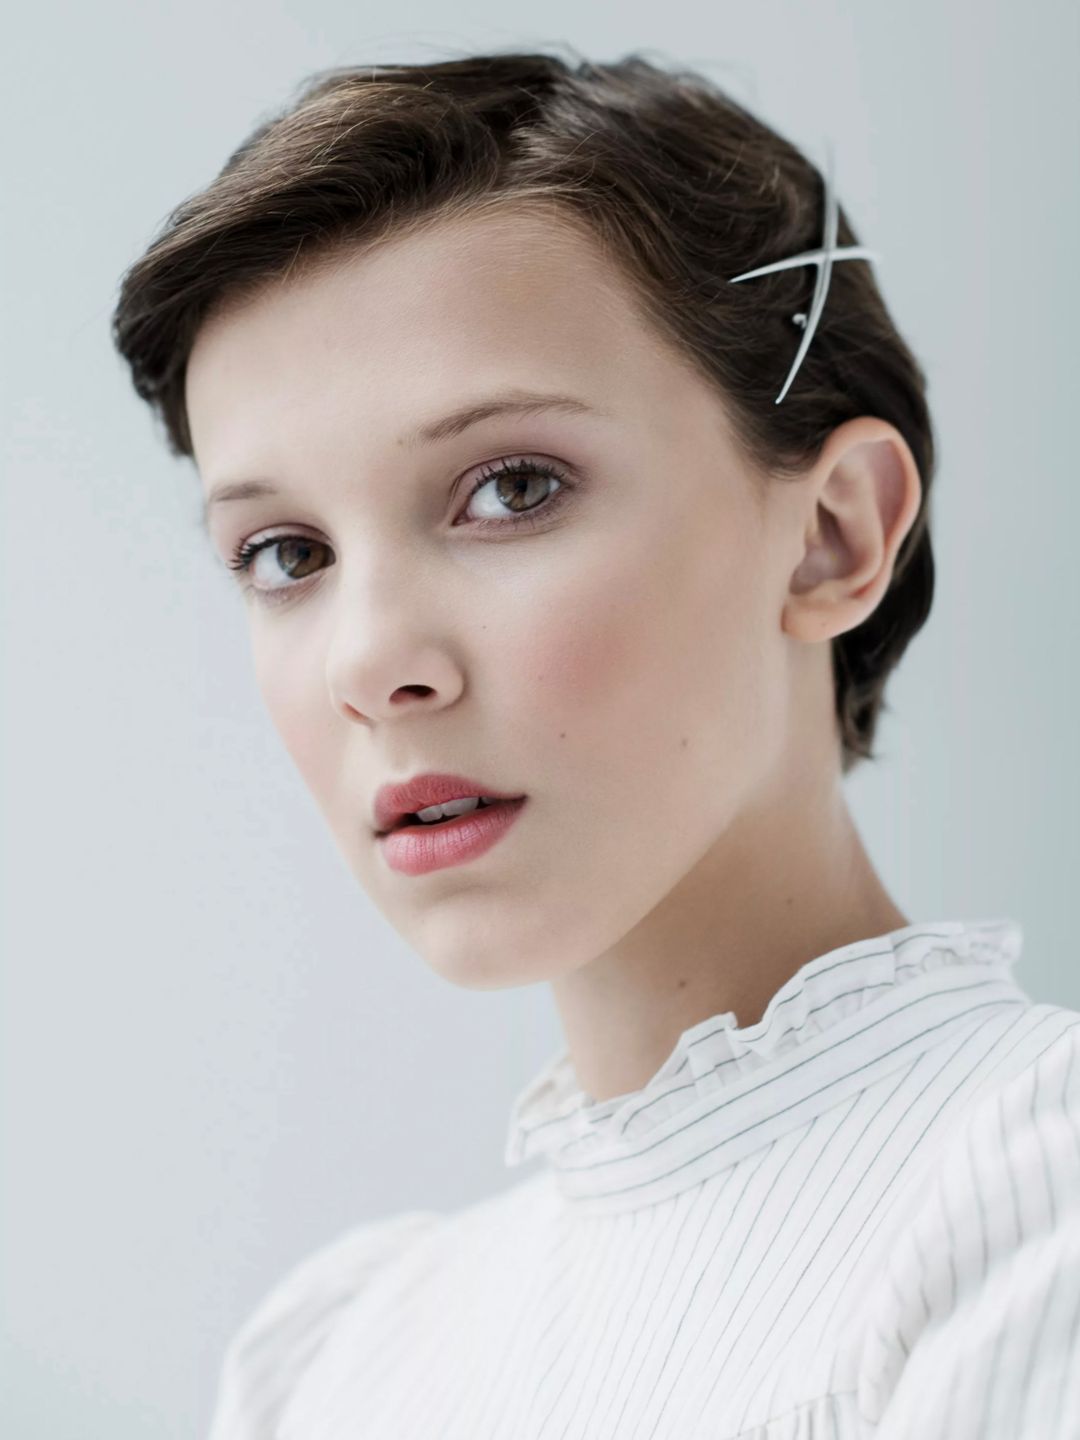 Millie Bobby Brown relationship